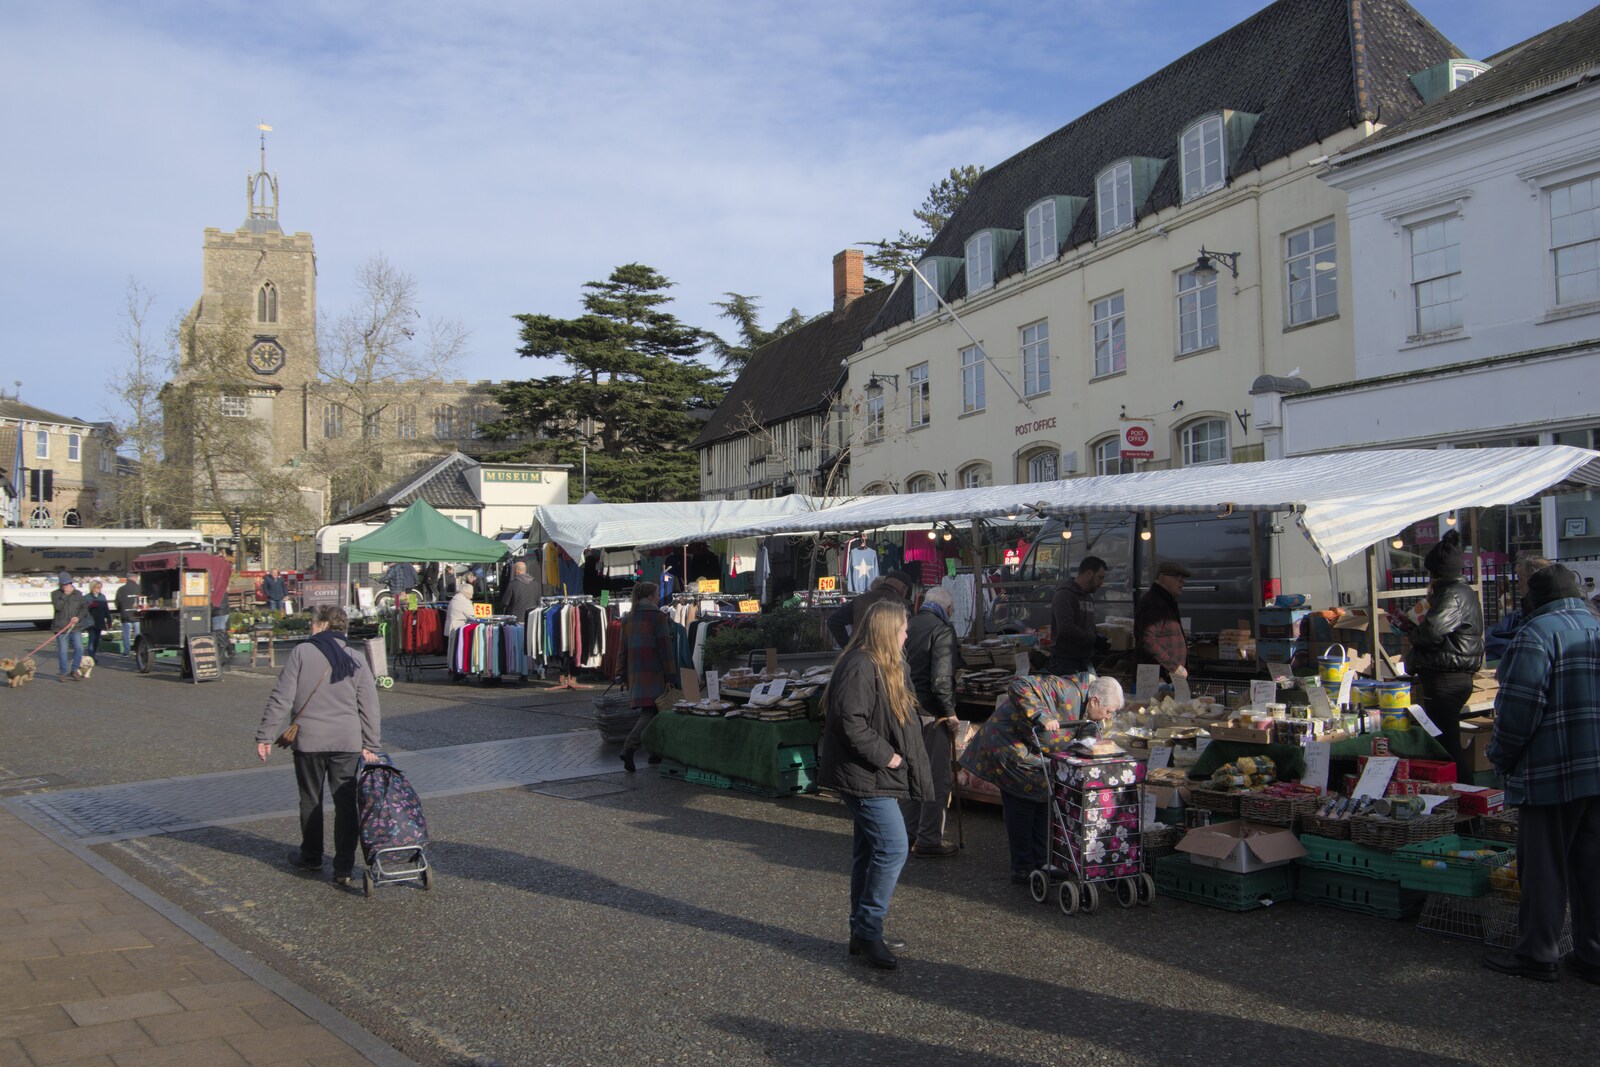 It's the traditional Friday market in Diss from A February Miscellany, Diss and Woodbridge, Suffolk - 3rd February 2024